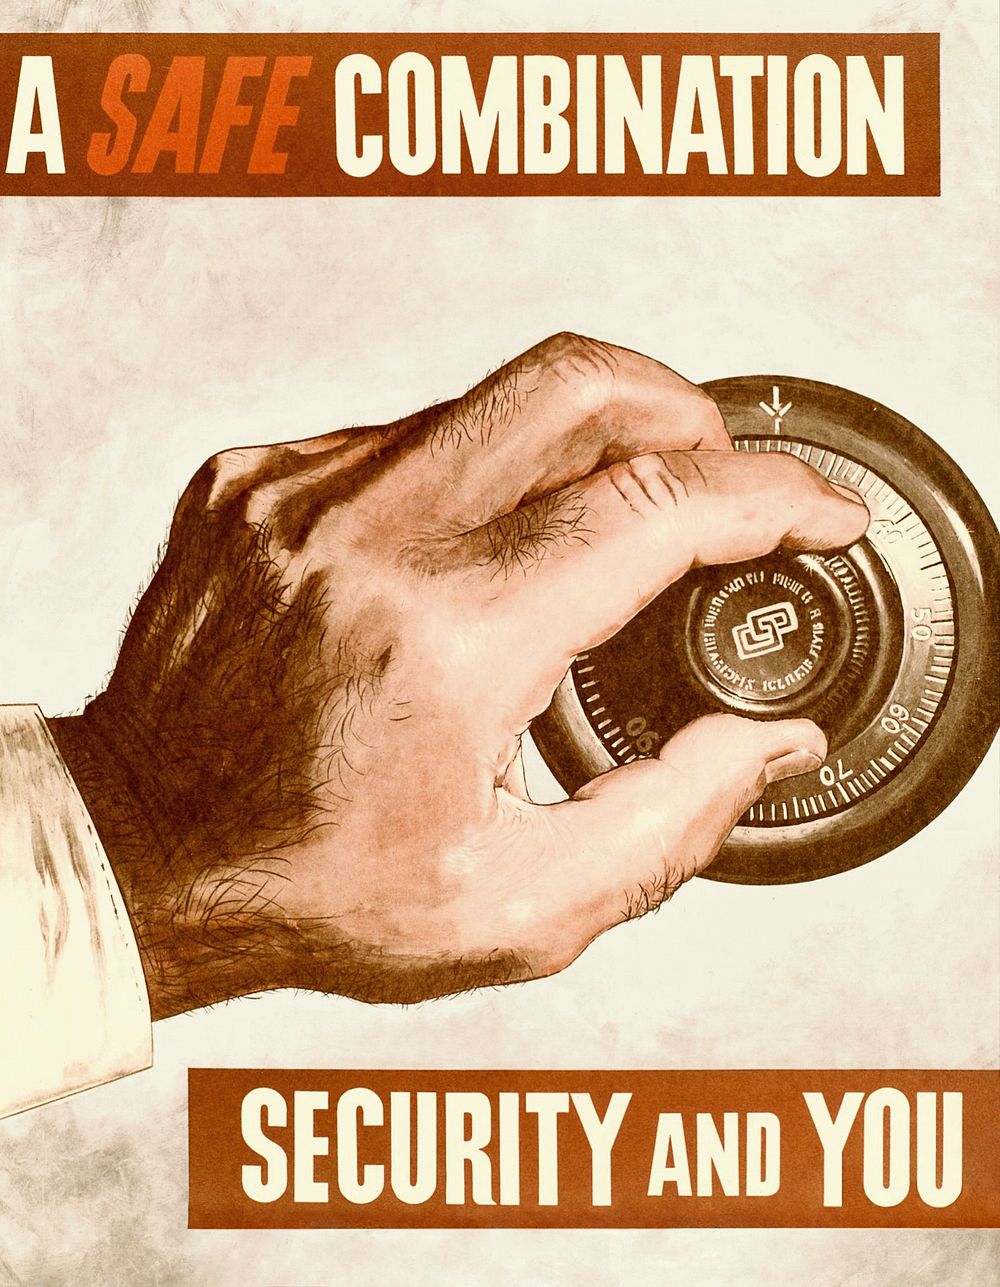 Security motivational poster (1950-1969) chromolithograph by NSA. Original public domain image from Wikipedia. Digitally…